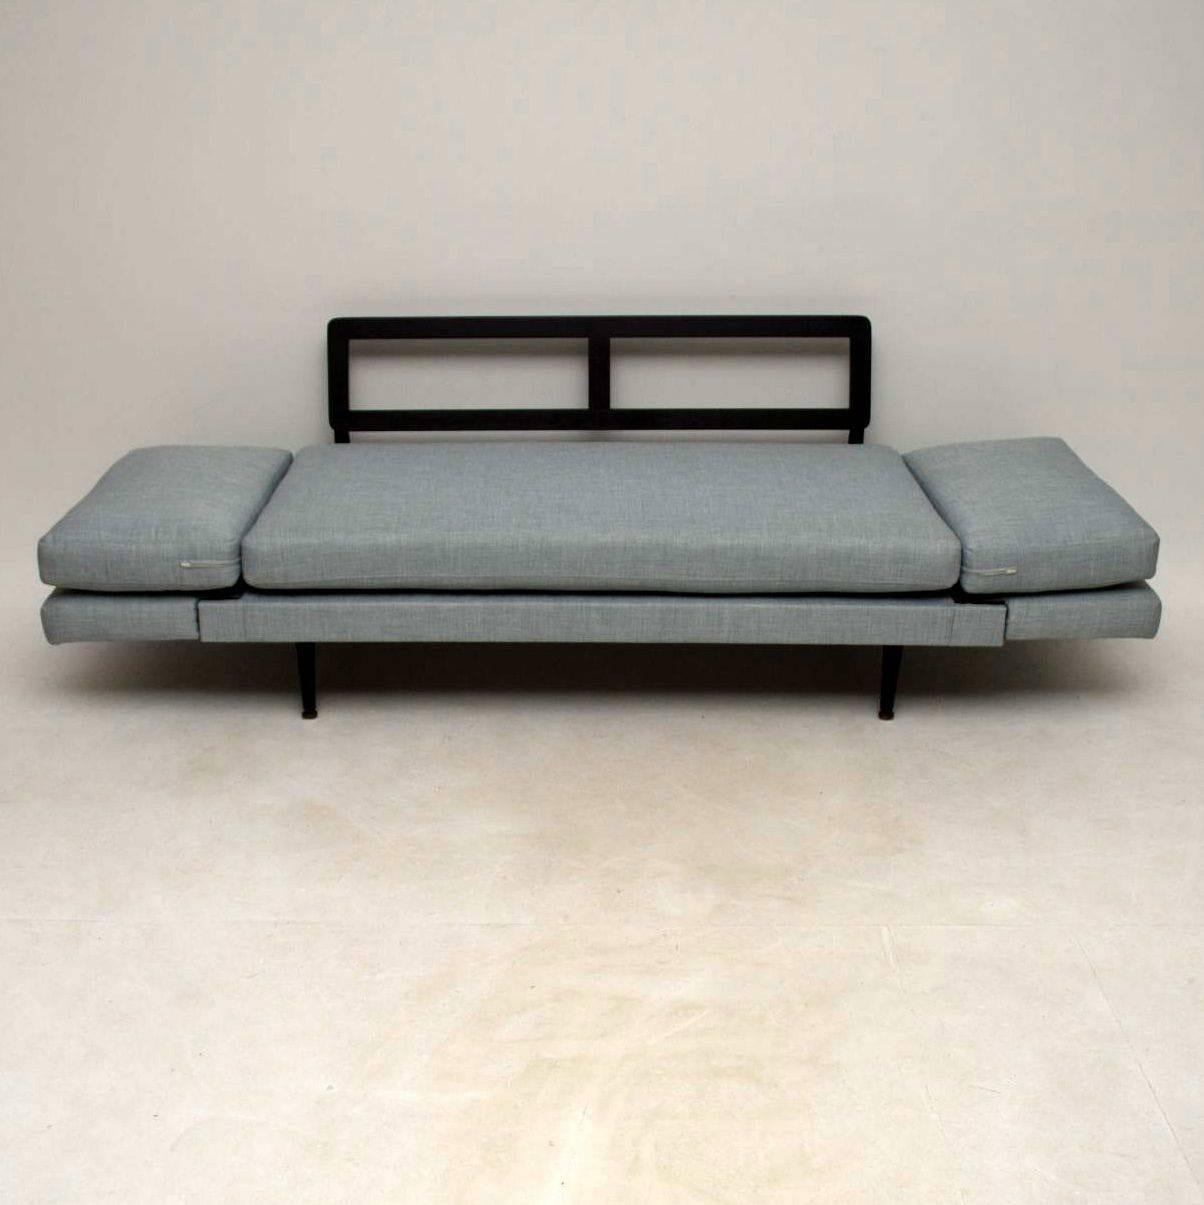 A compact and beautiful vintage sofa bed dating from the 1950s, this is a very practical and very comfortable piece of furniture. The arms drop down and the back cushions can be placed at either end to extend this into a bed. The back support also